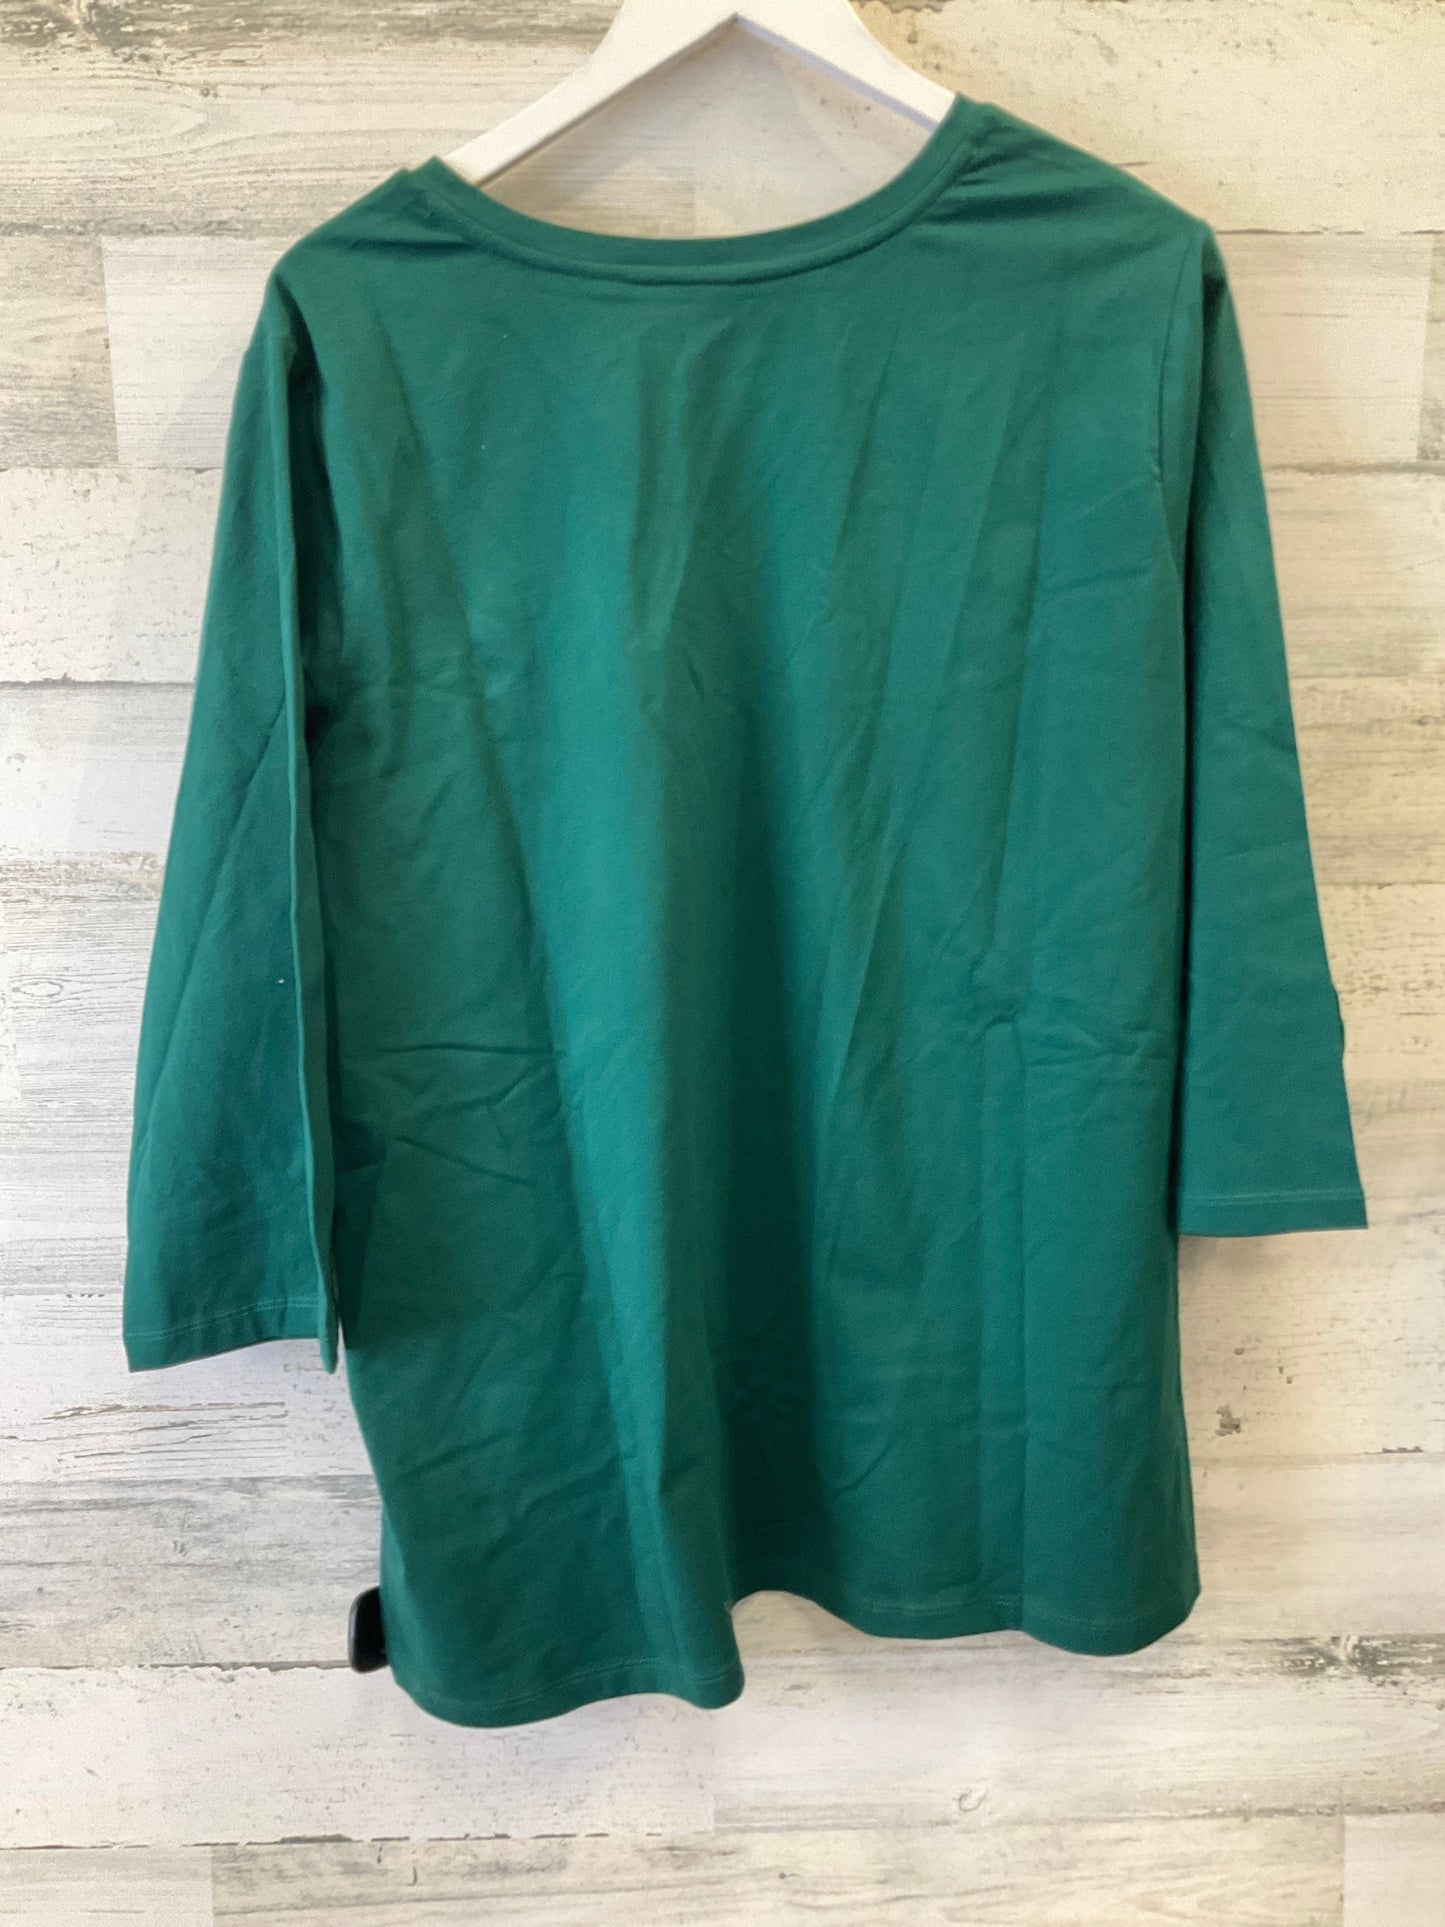 Green Top 3/4 Sleeve Denim And Company, Size 2x